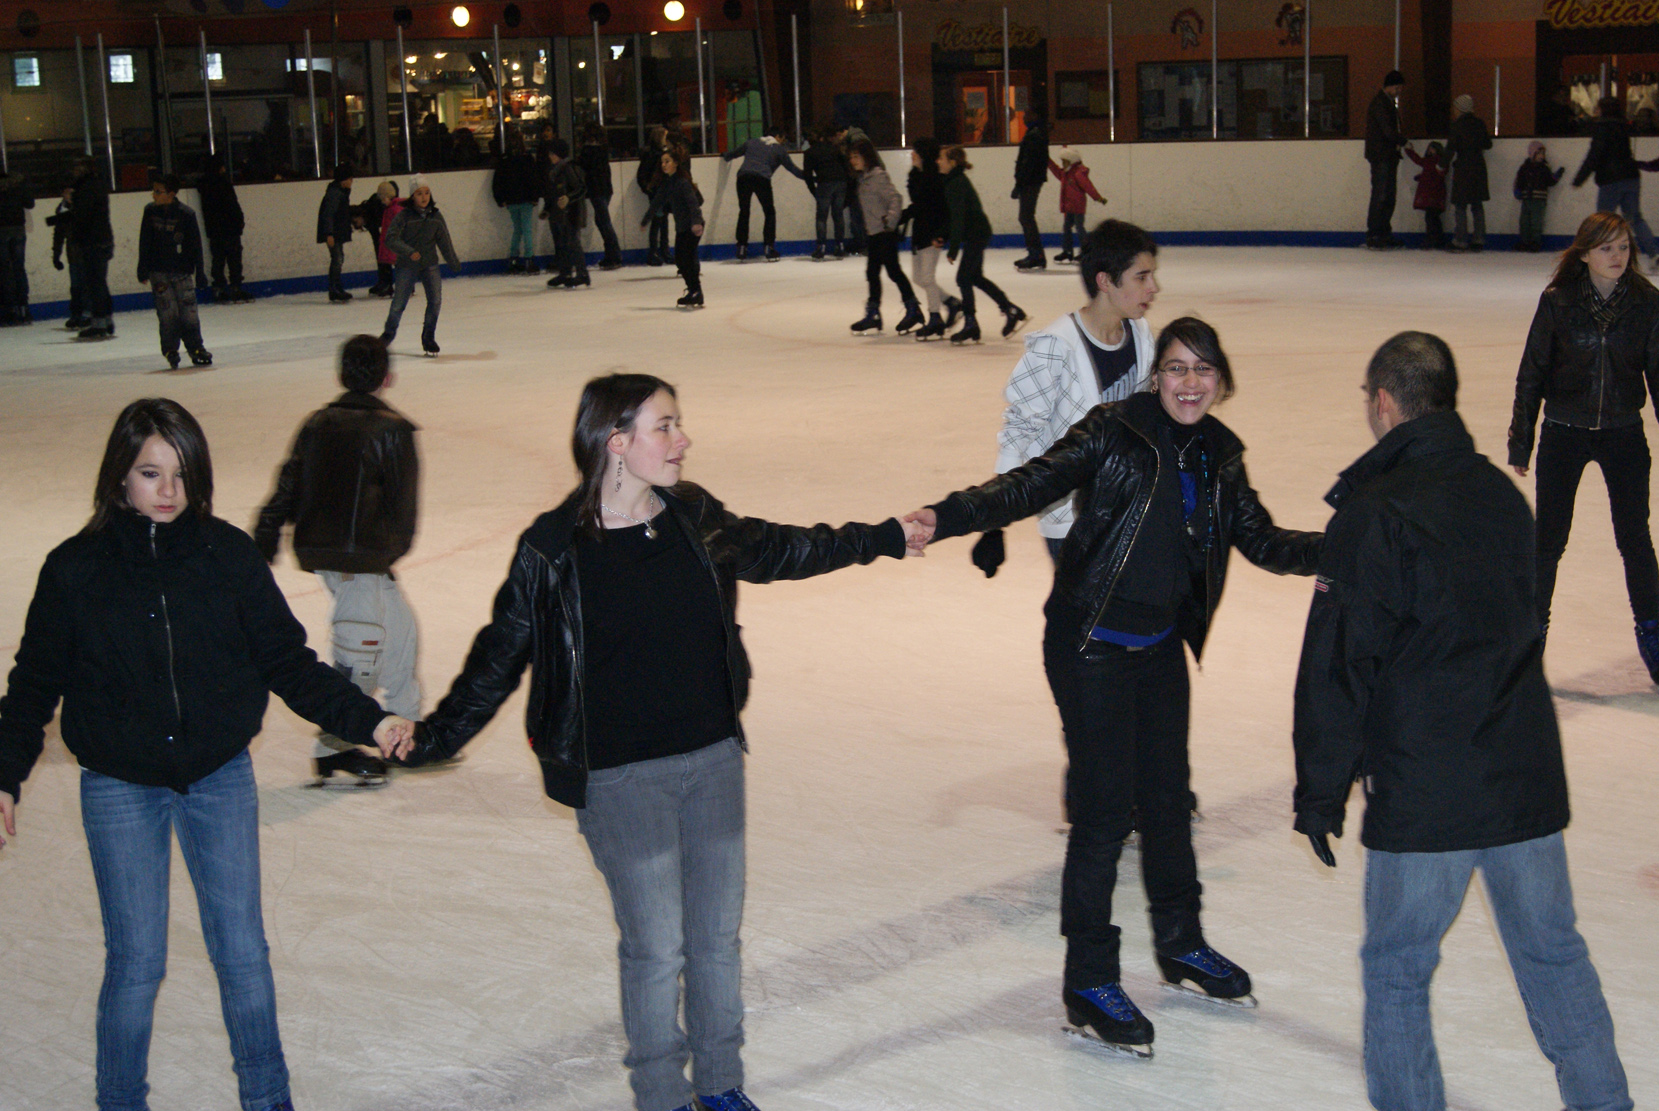 patinoire_soiree_hiver_003.JPG